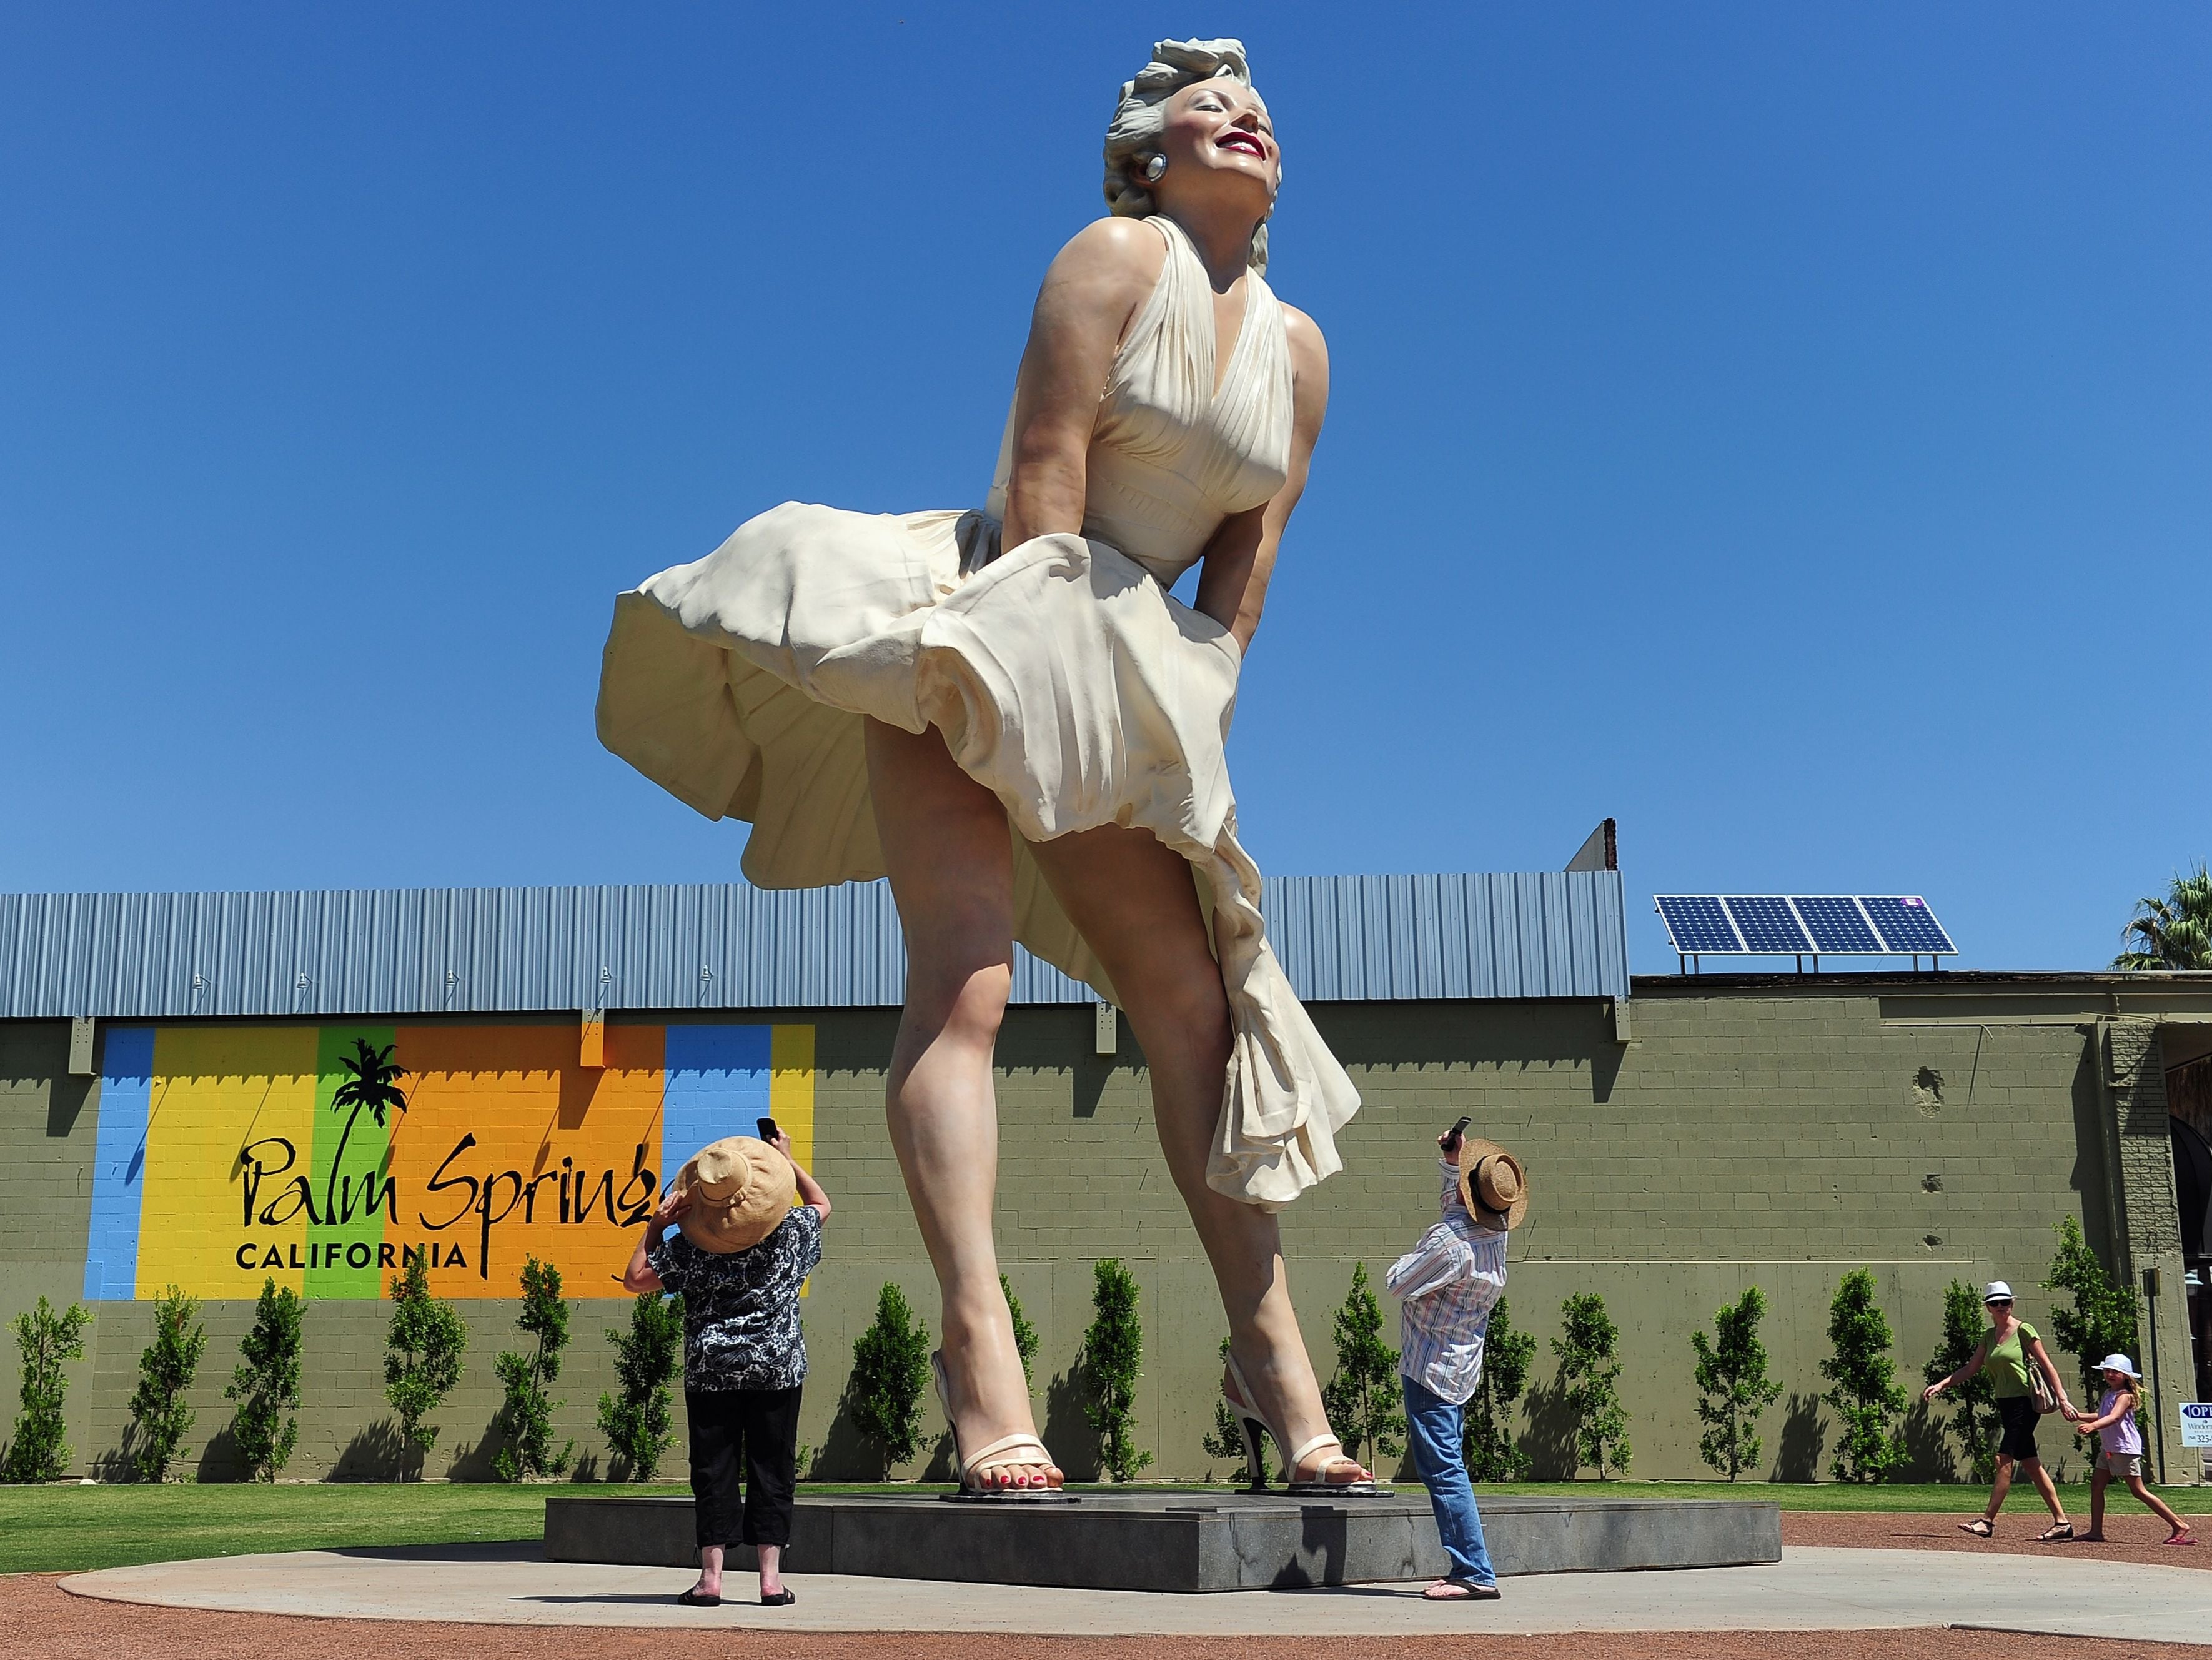 People visit and photograph the ‘Forever Marilyn’ statue of actress Marilyn Monroe in Palm Springs, California, on 4 August 2012